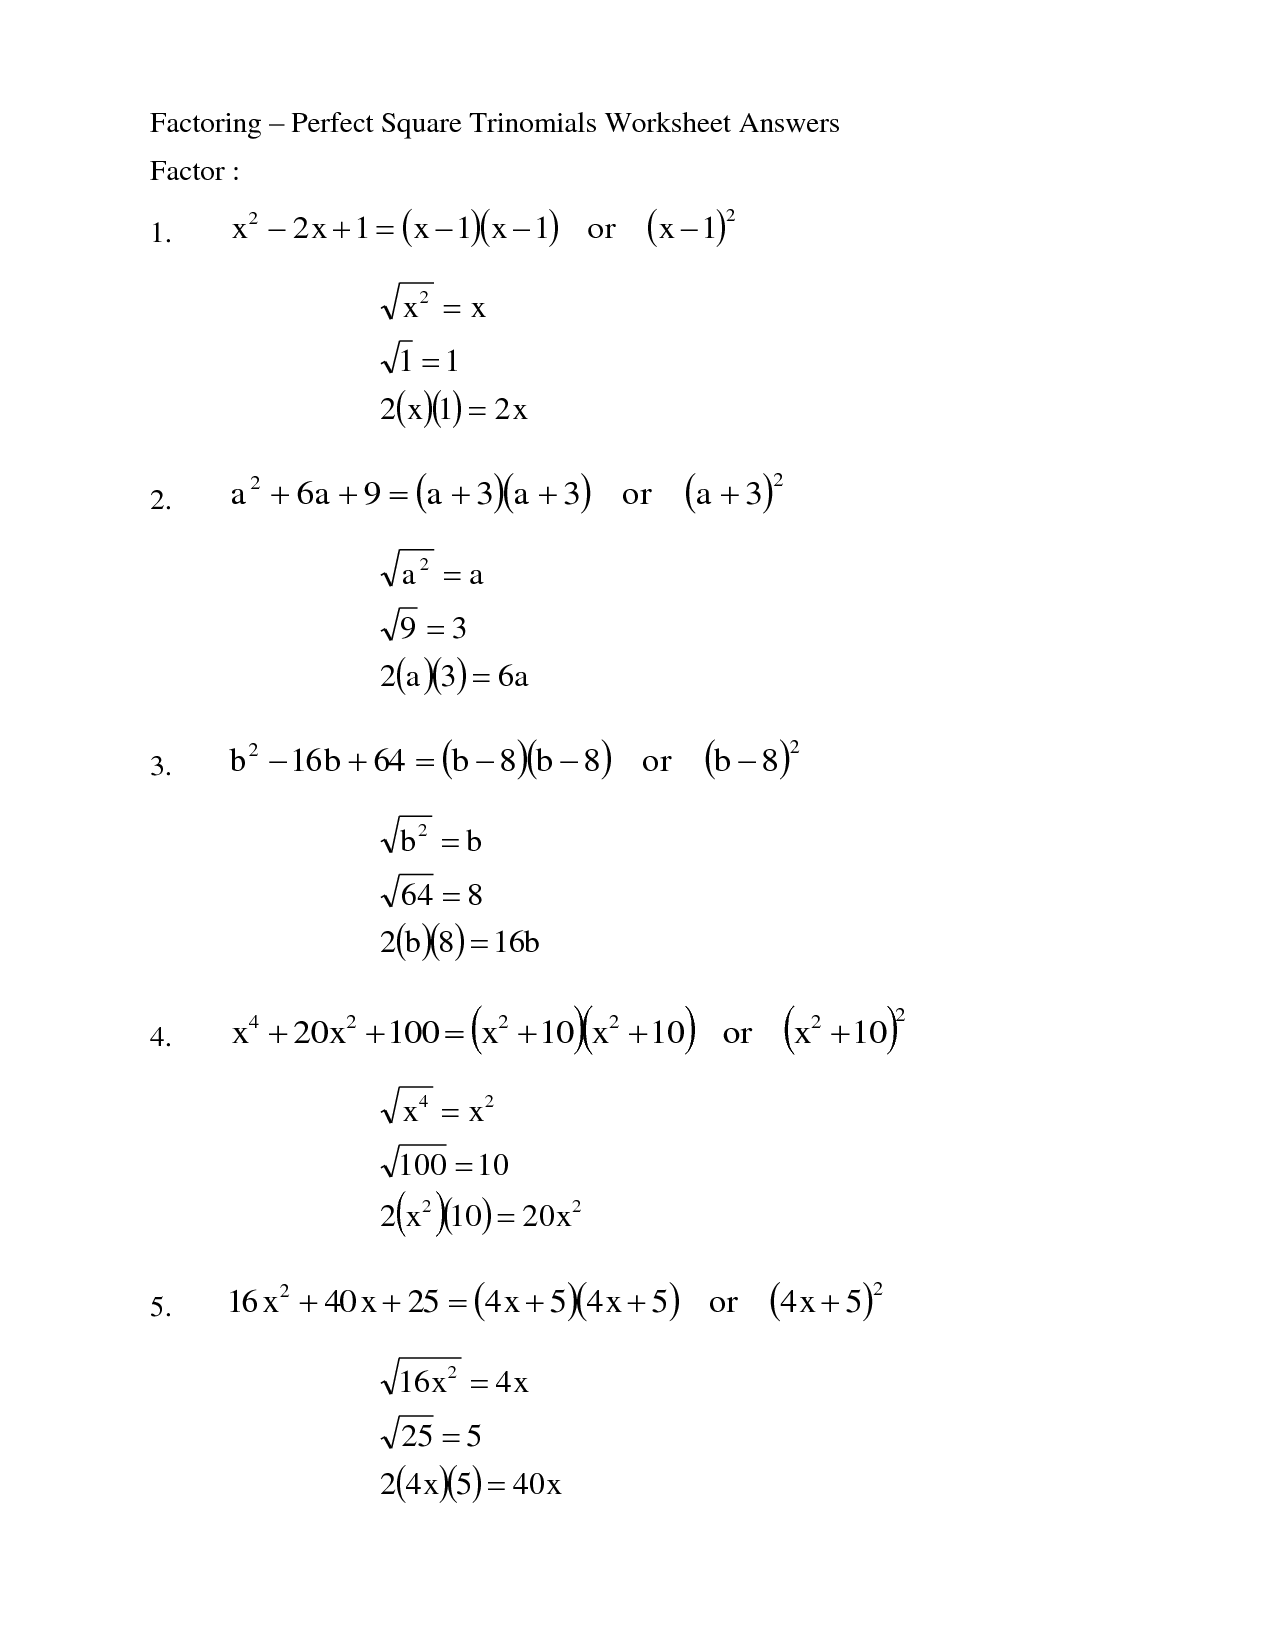 12 Best Images of Factoring Polynomials By Grouping Worksheets  Factoring by Grouping Worksheet 